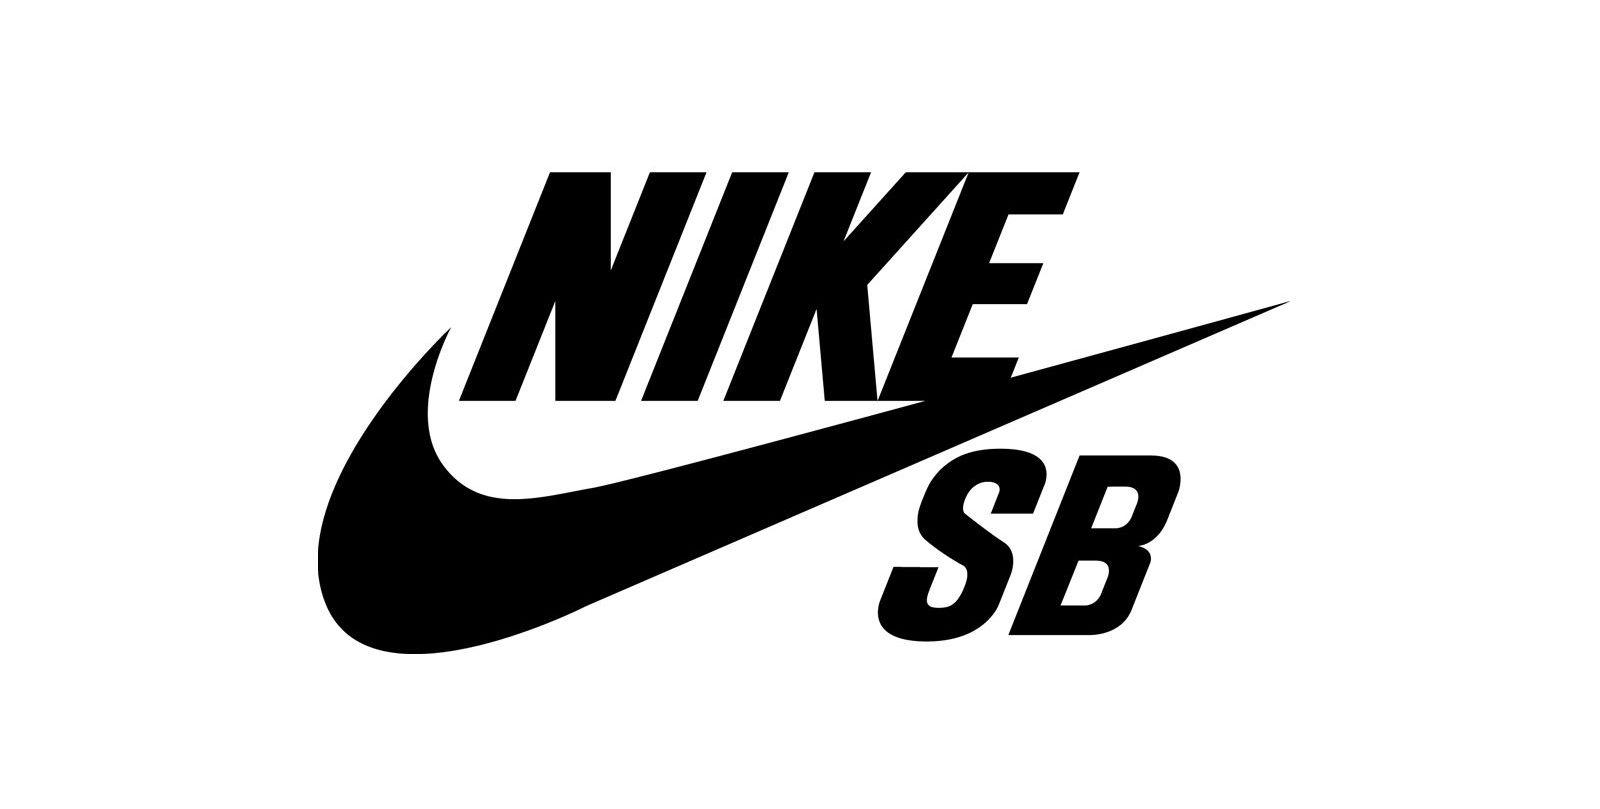 Almost Logo - Nike Logo, Nike Symbol Meaning, History and Evolution